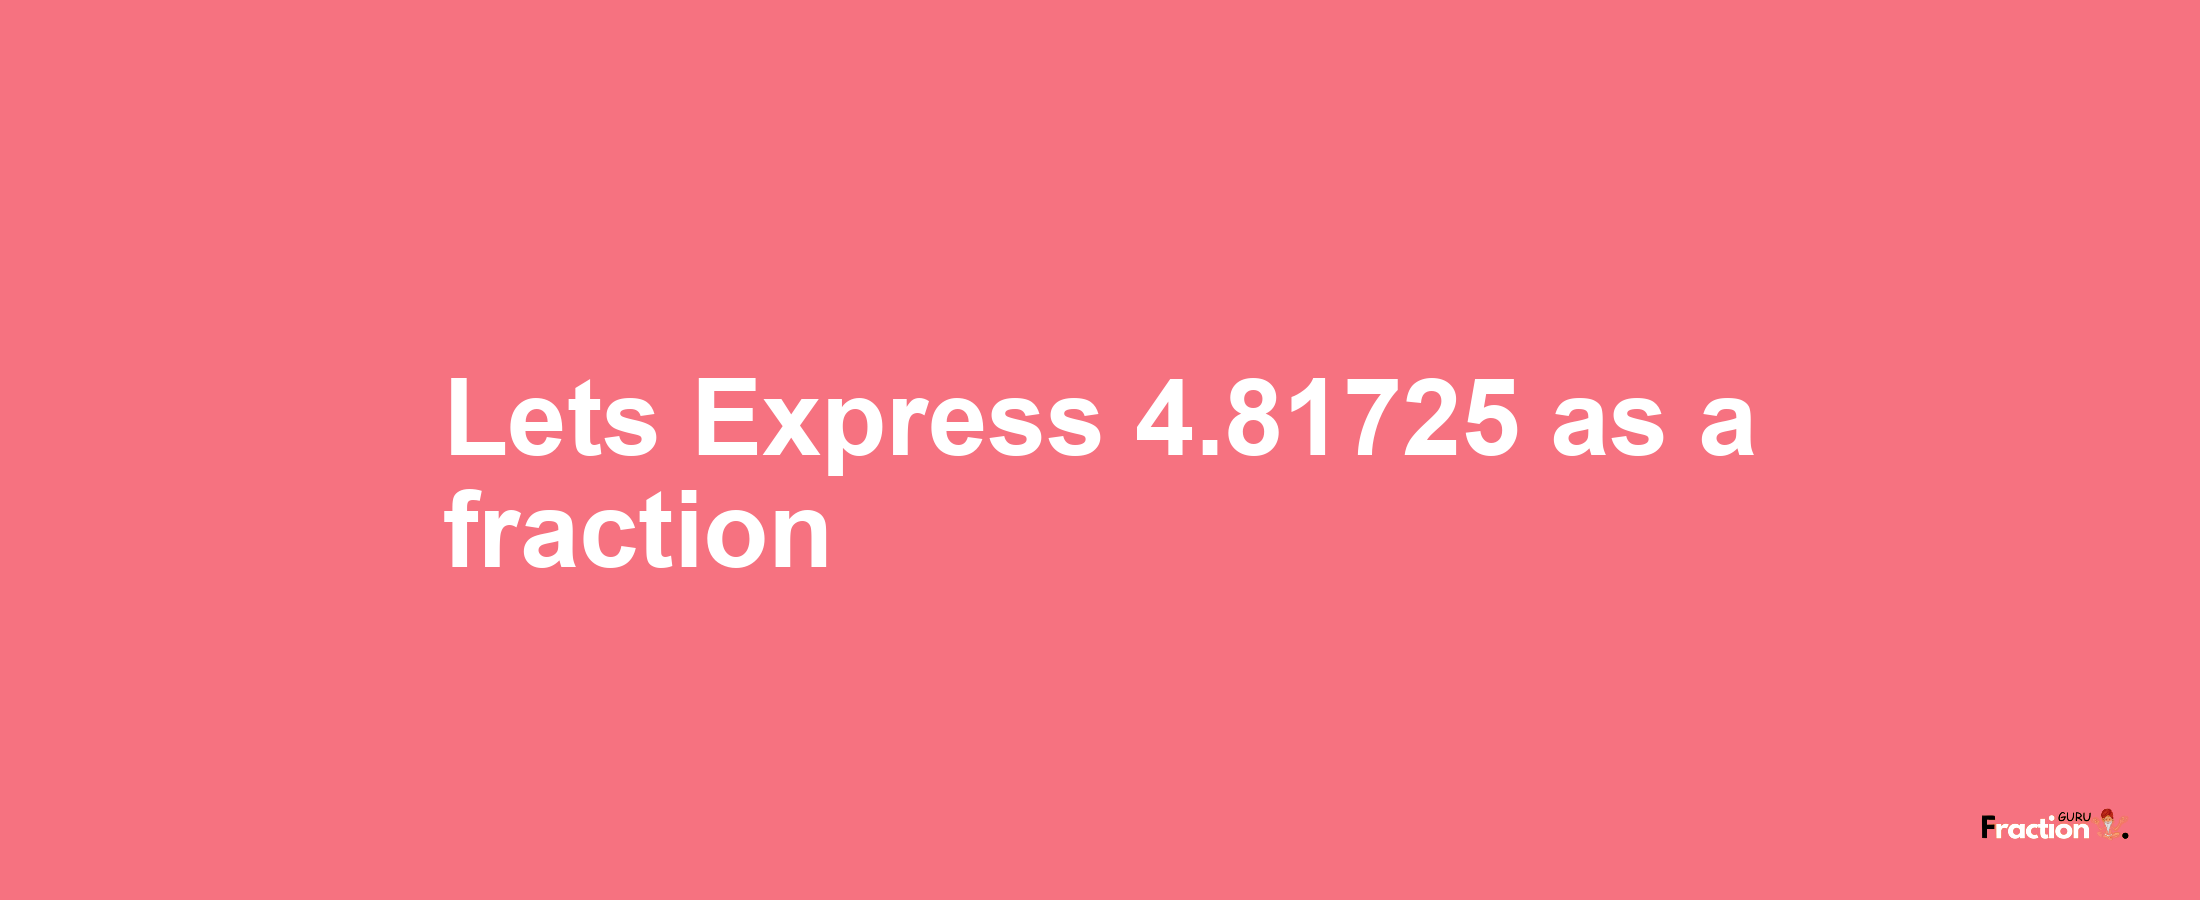 Lets Express 4.81725 as afraction